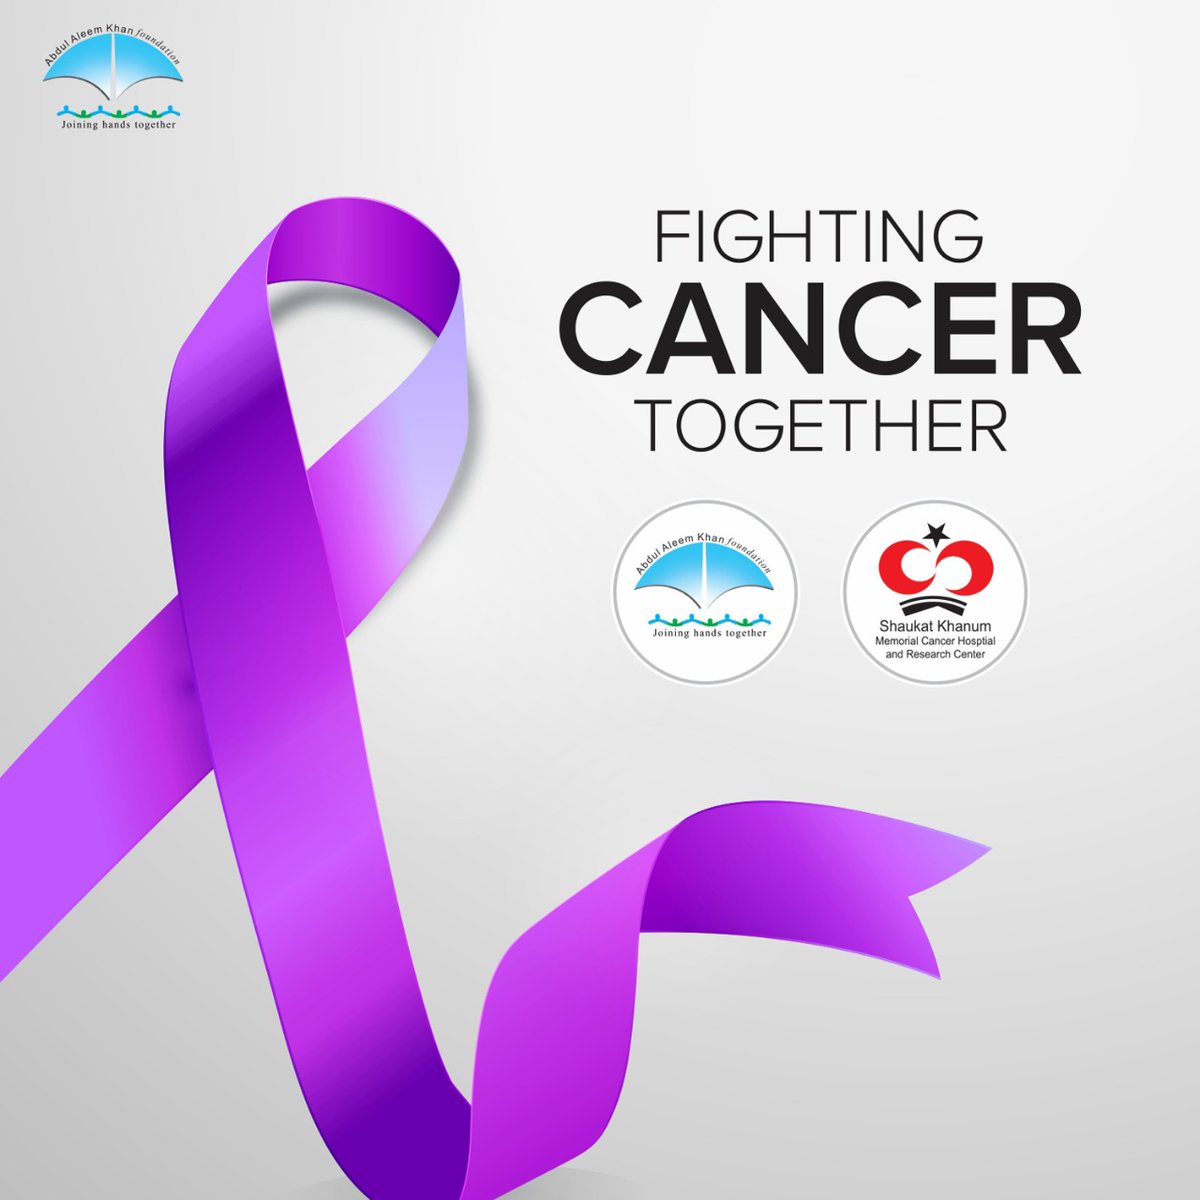 Abdul Aleem Khan Foundation is fighting cancer with Shaukat Khanum Cancer Hospital by giving donations annually & fulfilling its social responsibility in Shaukat Khanum’s mission to provide free cancer treatment to everyone who can’t afford
 #AAK_Foundation #shoukatkhanamhospital